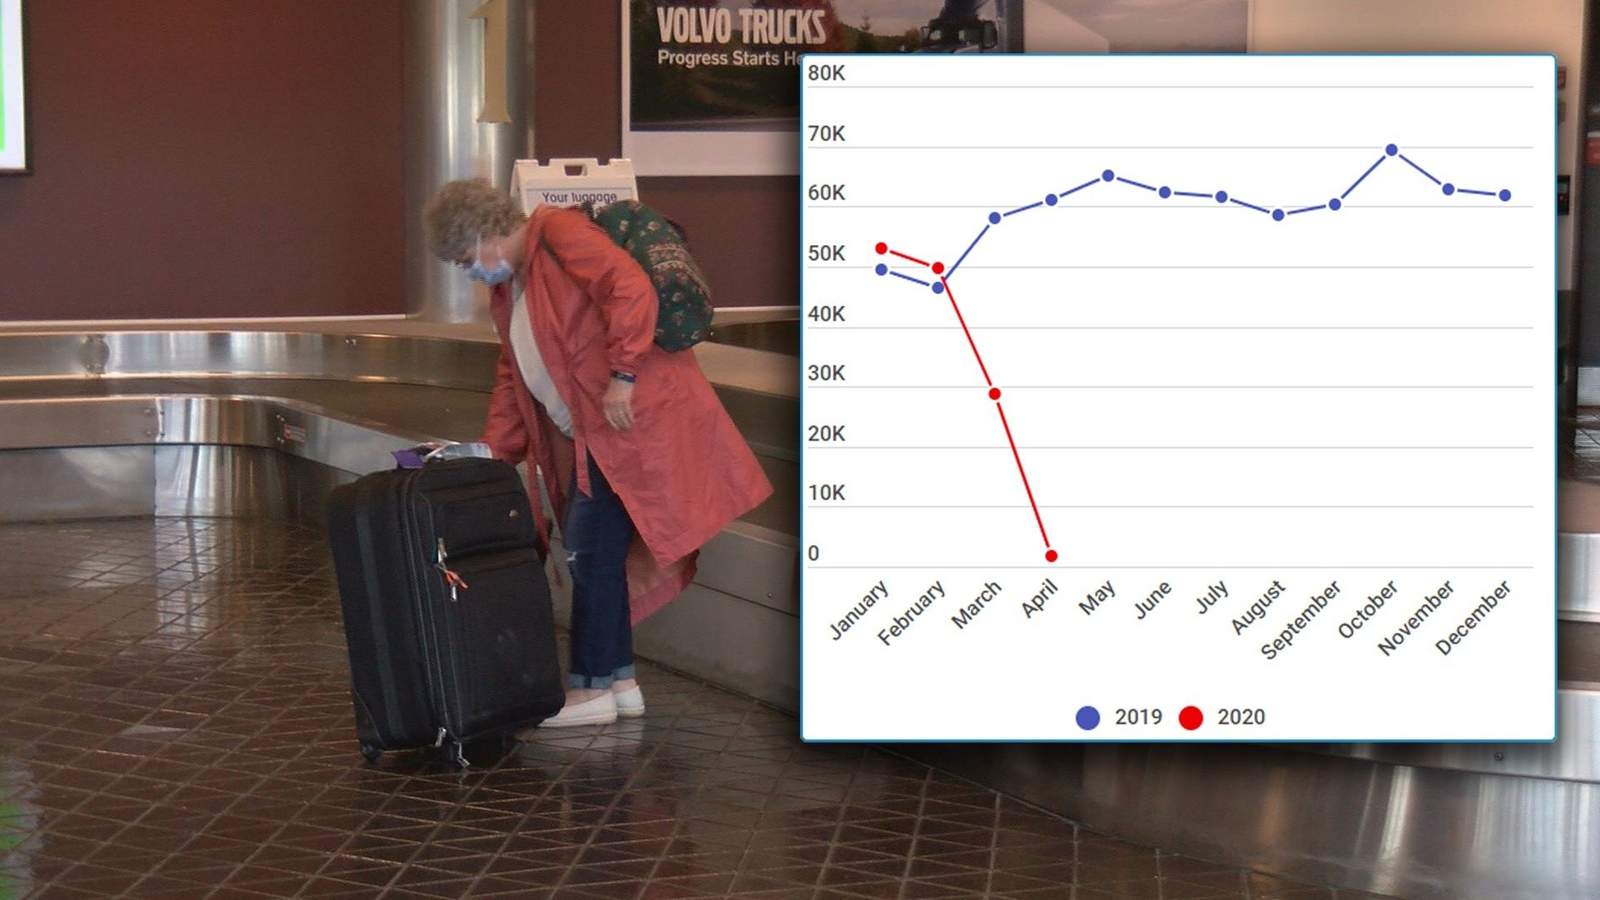 Roanoke airport sees 97% decrease in passengers from prior April